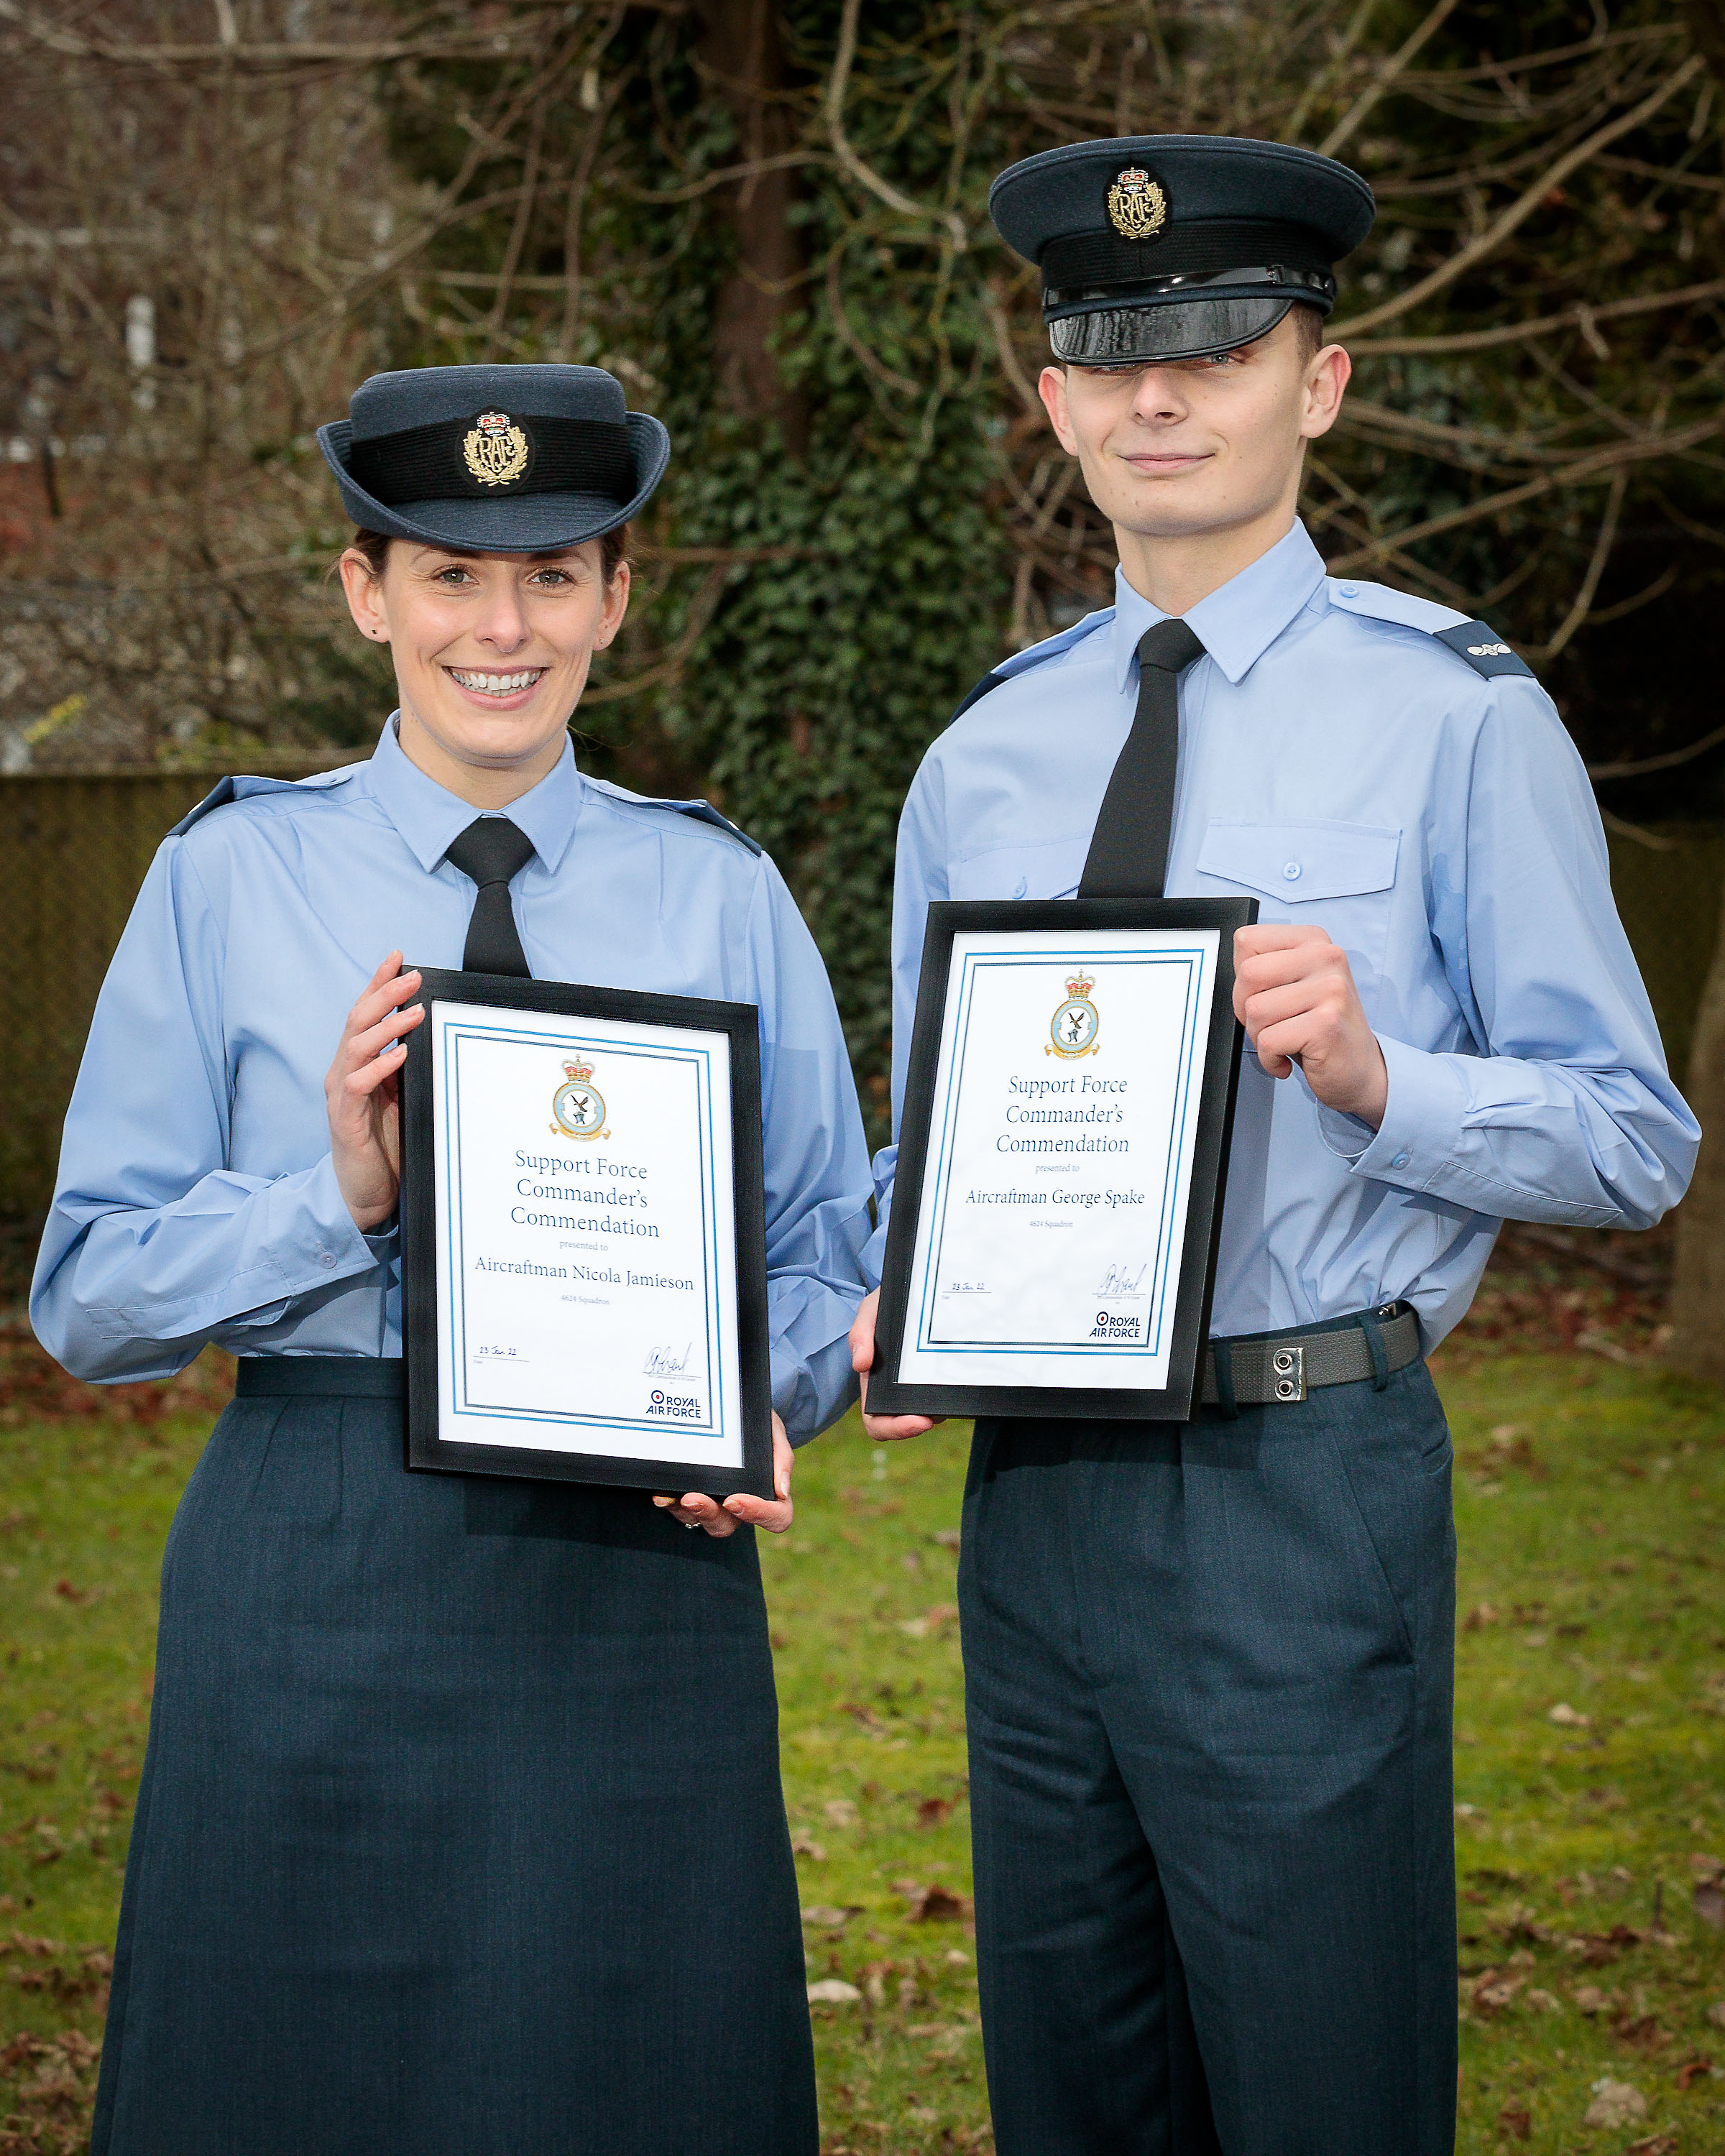 Aircraftman Jamieson and Aircraftman Spake were awarded the Support Force Commander commendation